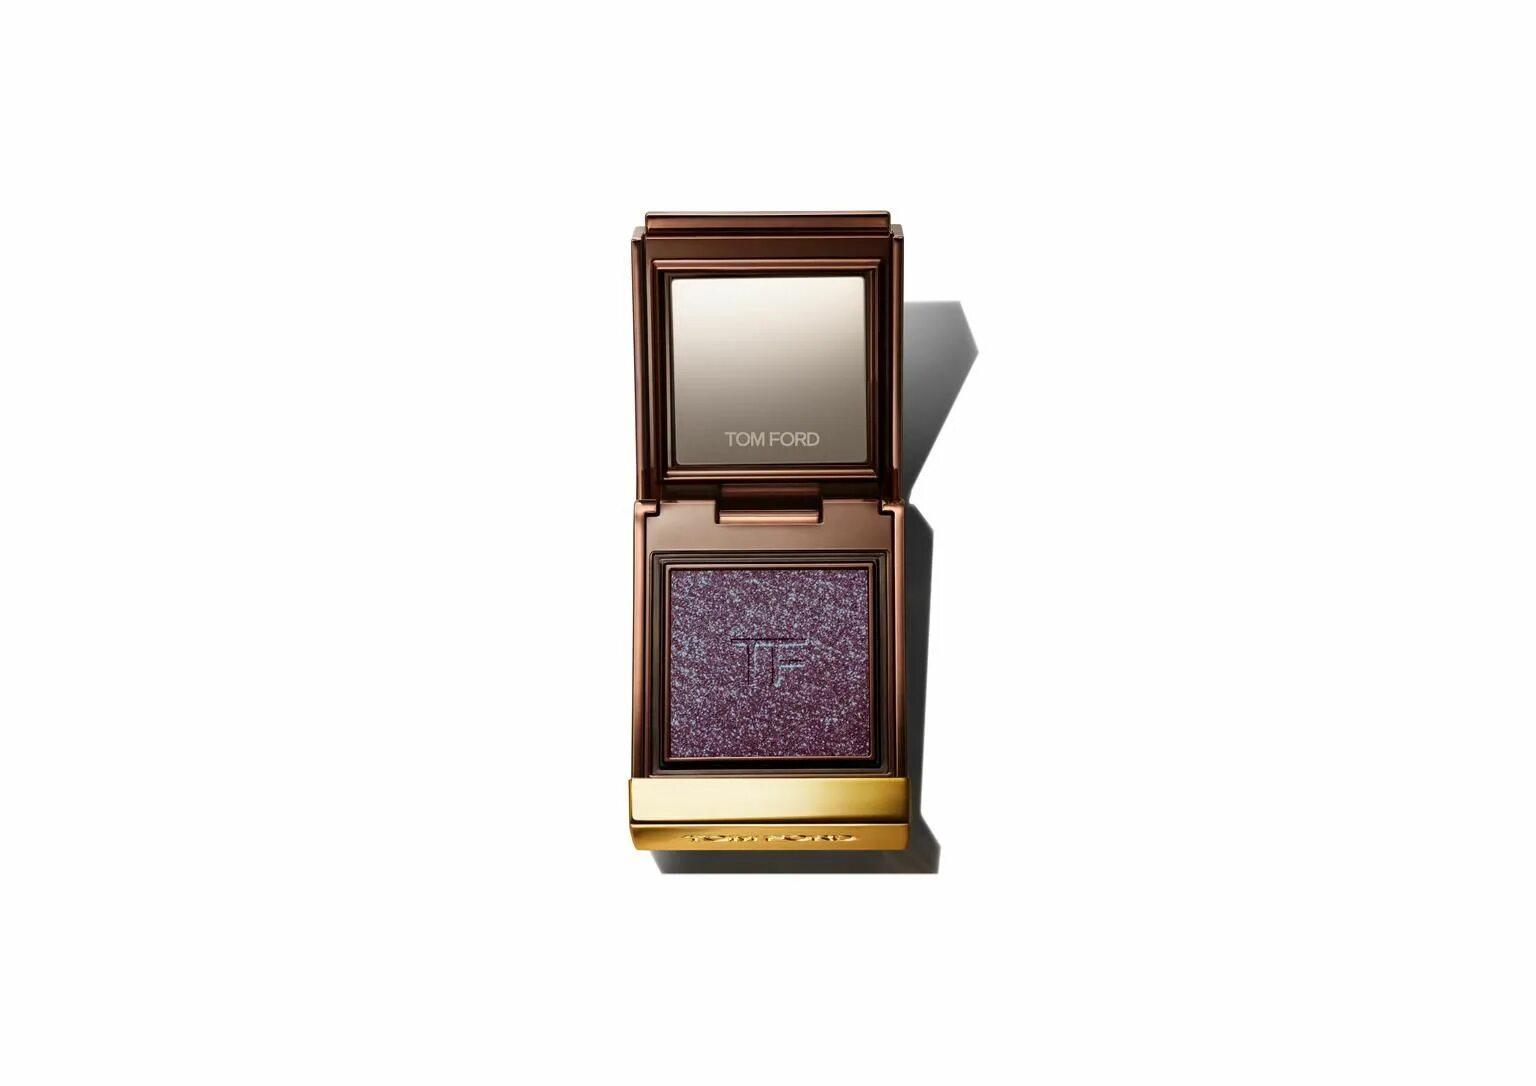 Tom shadow. Tom Ford private Shadow Ombré. Тени Tom Ford private Shadow 02. Moonlight Sateen Tom Ford. Tom Ford private Shadow Ombré Photographic.